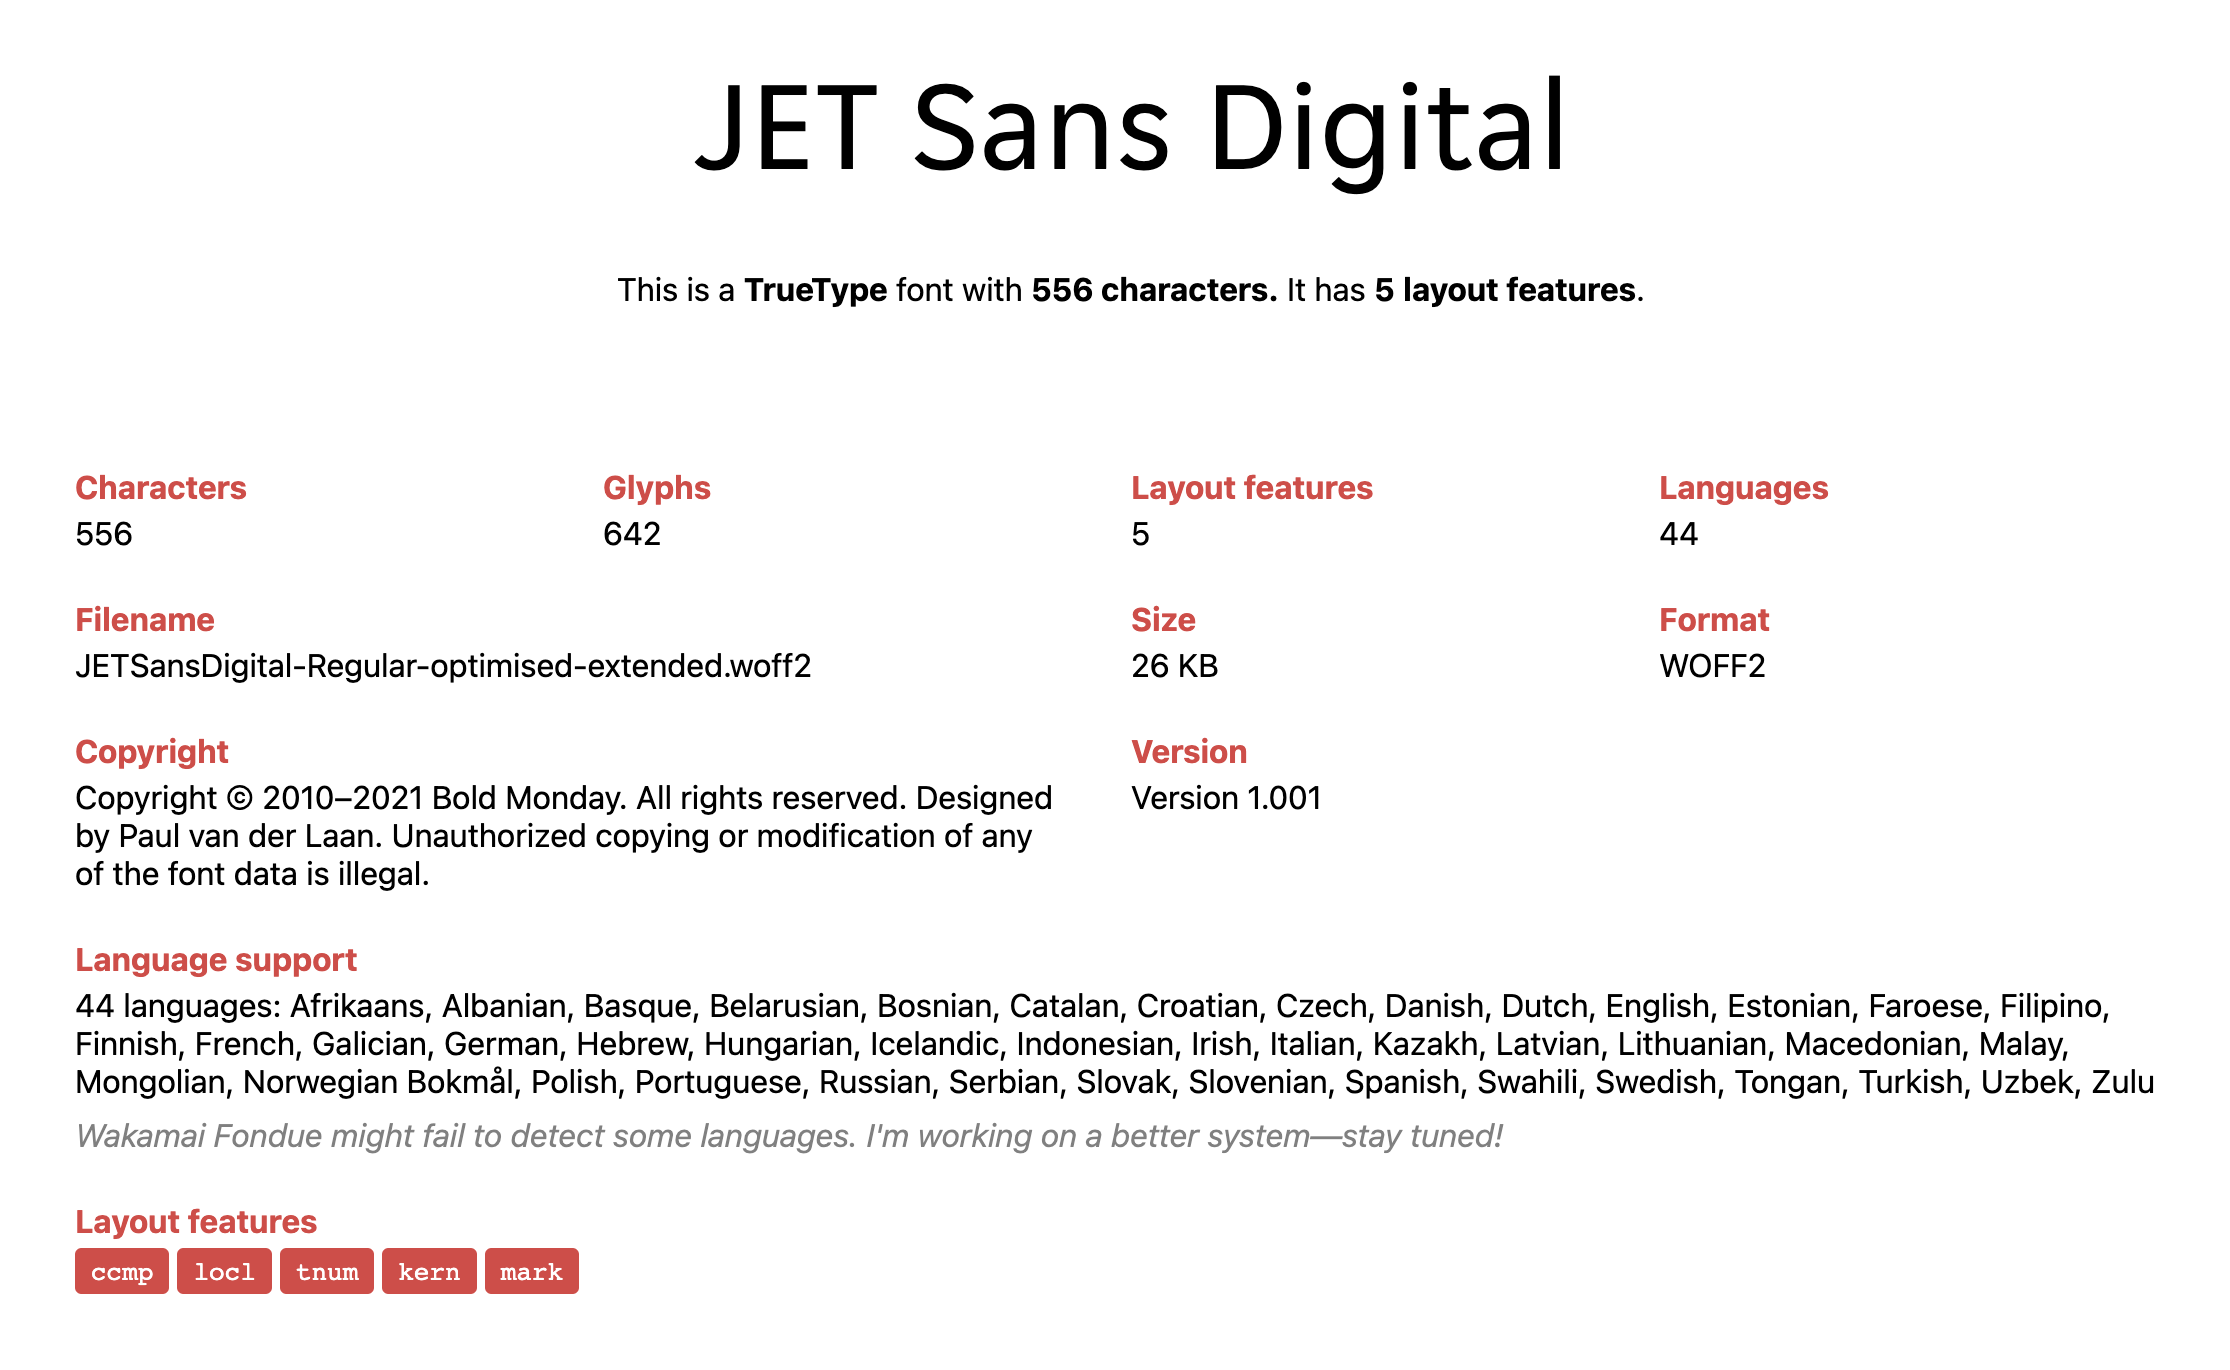 Wakamai Fondue font specification for JETSans Digital – the extended base subset. The subset is approximately double the size, containing more characters, glyphs, layout features and languages.